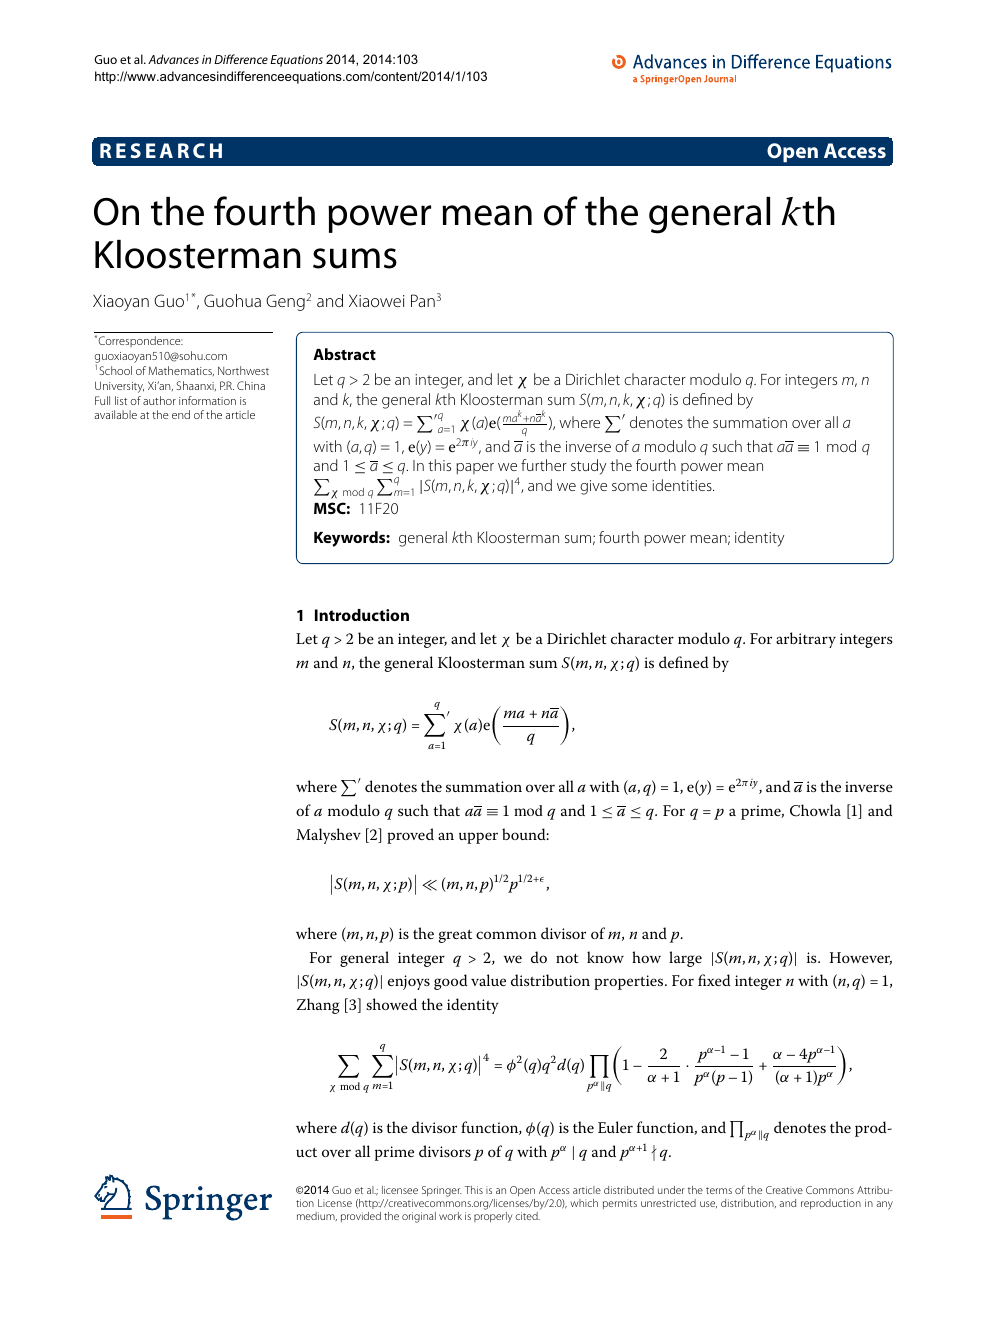 On The Fourth Power Mean Of The General Kth Kloosterman Sums Topic Of Research Paper In Mathematics Download Scholarly Article Pdf And Read For Free On Cyberleninka Open Science Hub